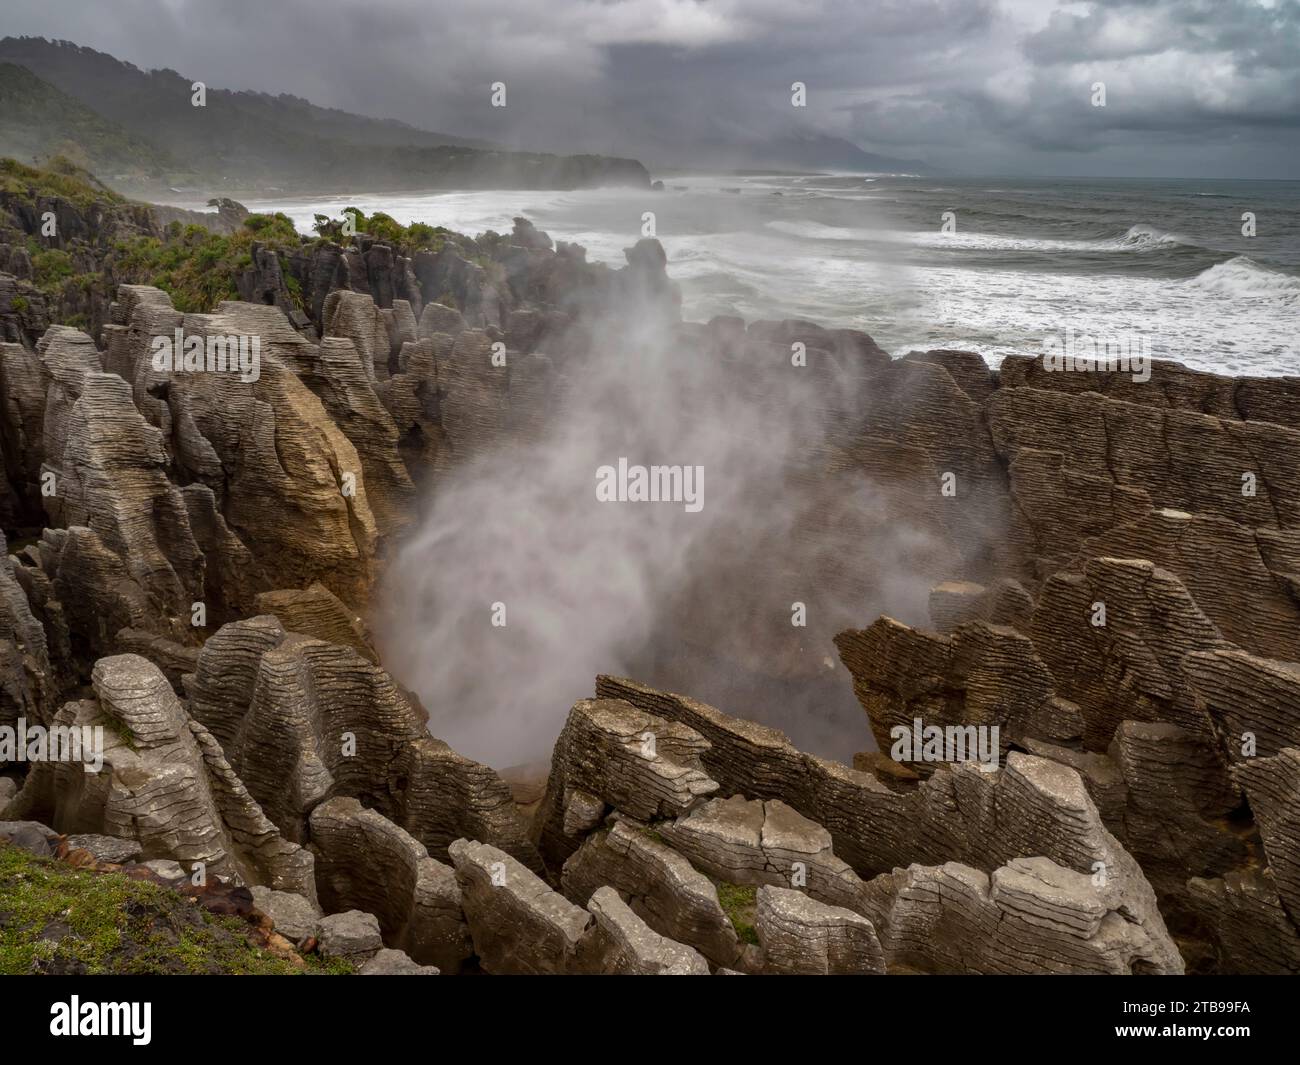 High tide and a strong swell produce a blast of ocean mist at a rocky blowhole; Greymouth, Punakaiki, South Island, New Zealand Stock Photo